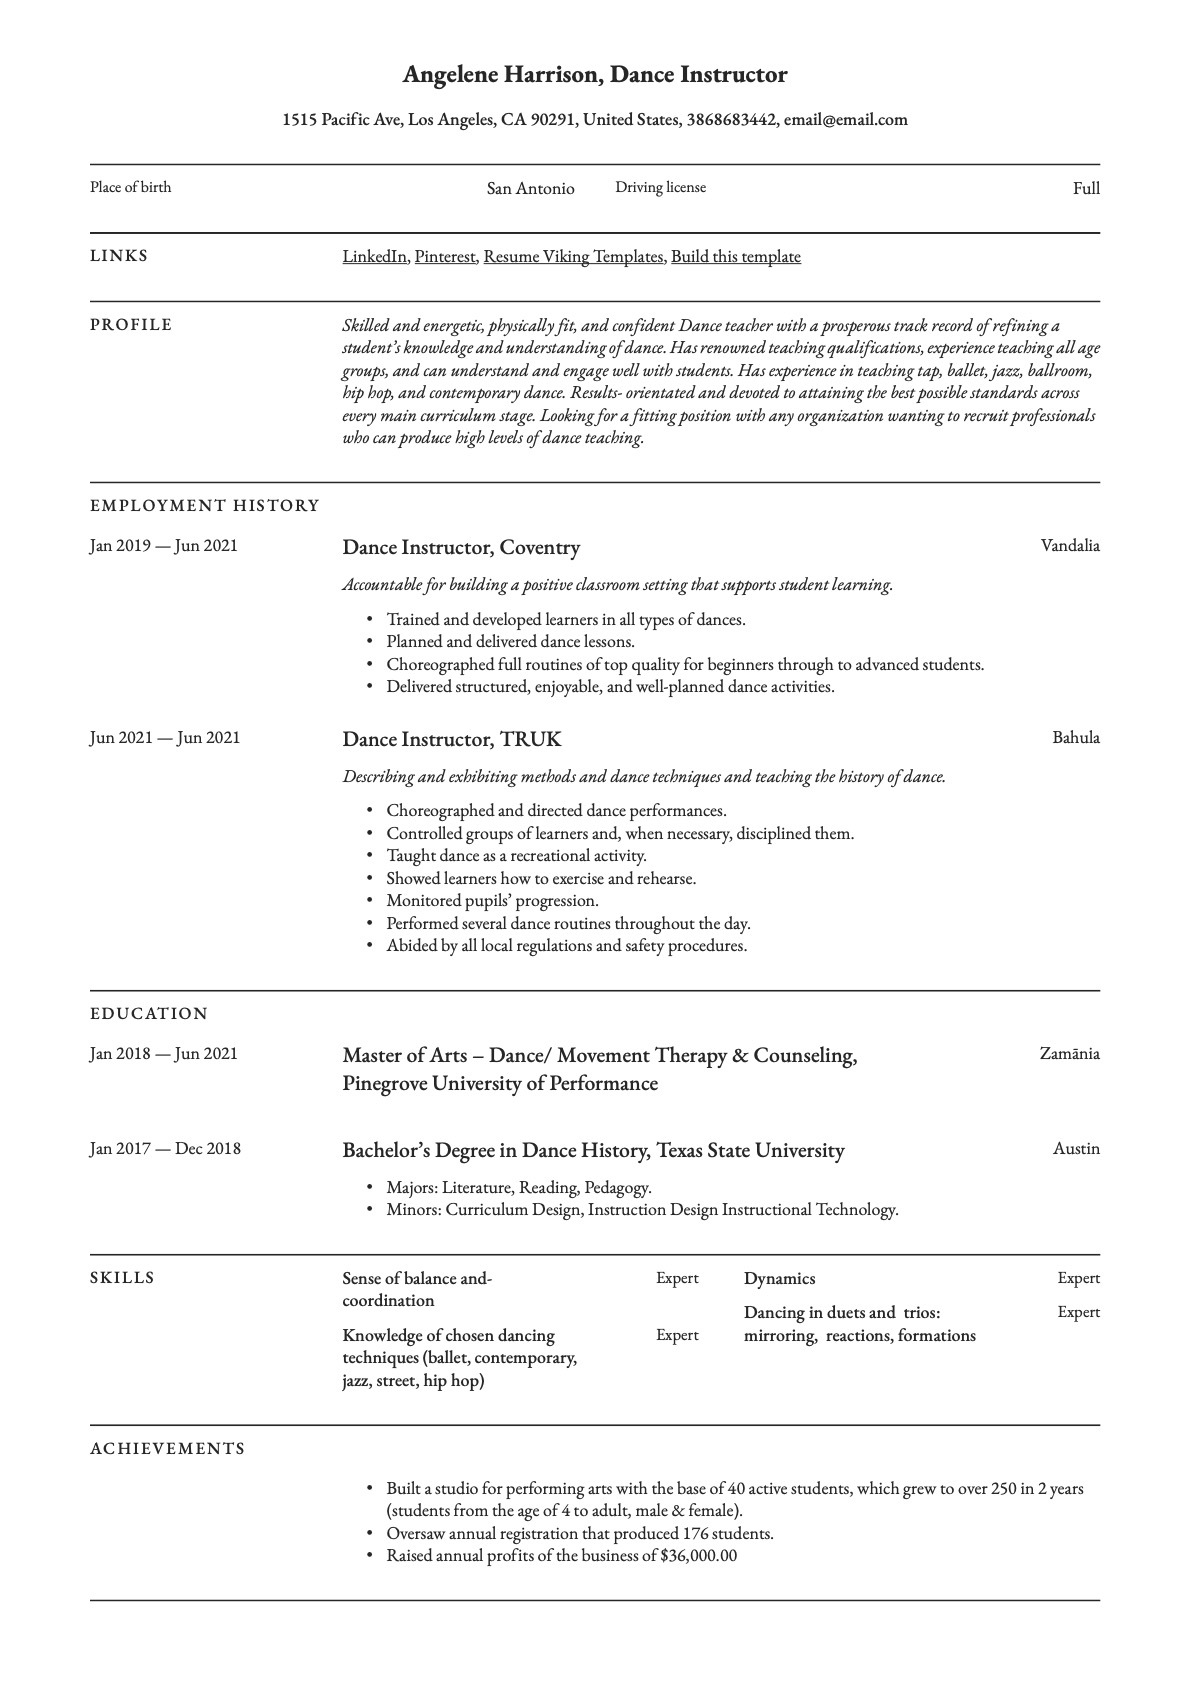 Professional Dance Instructor Resume Template